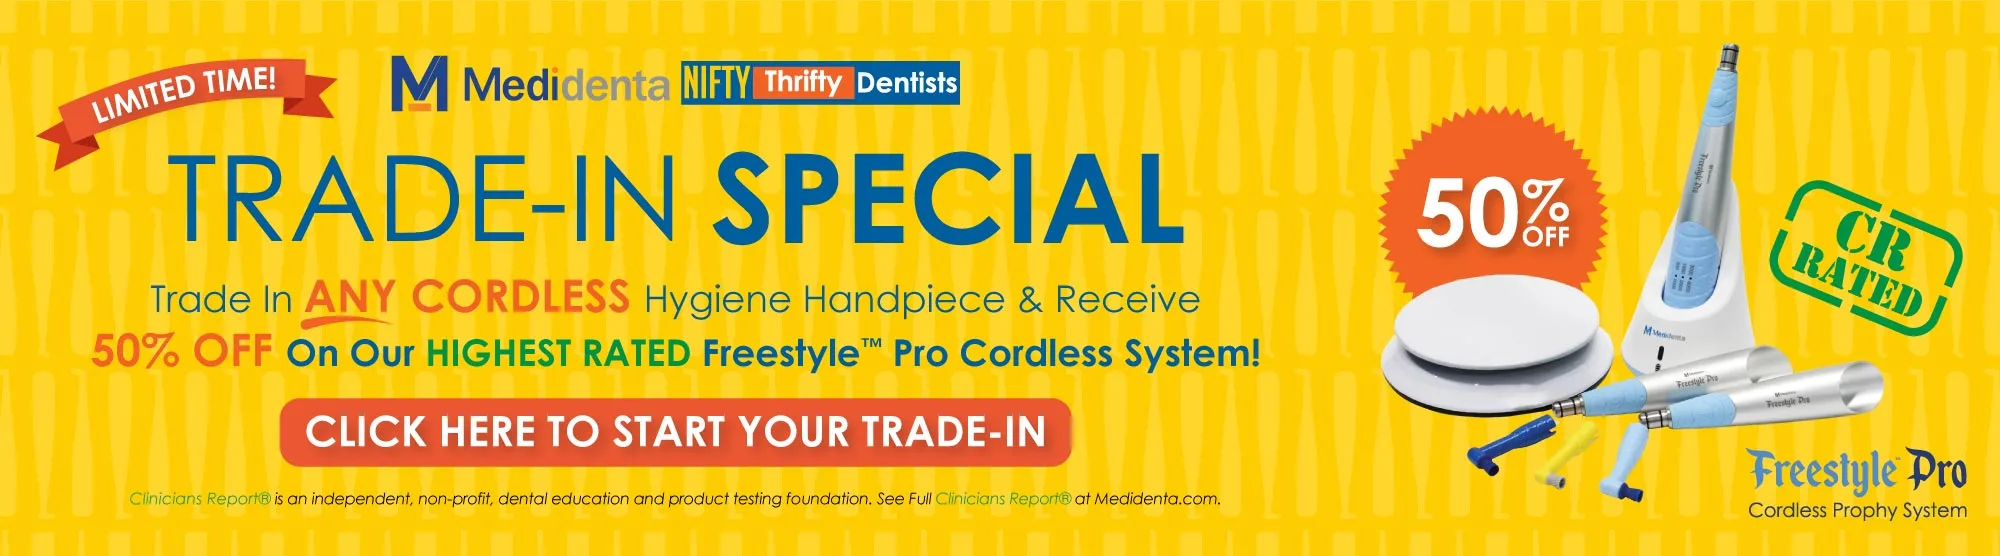 Nifty-Medidenta-Front-Page-Banners-Freestyle-Pro-Trade-In-Special_Desktop